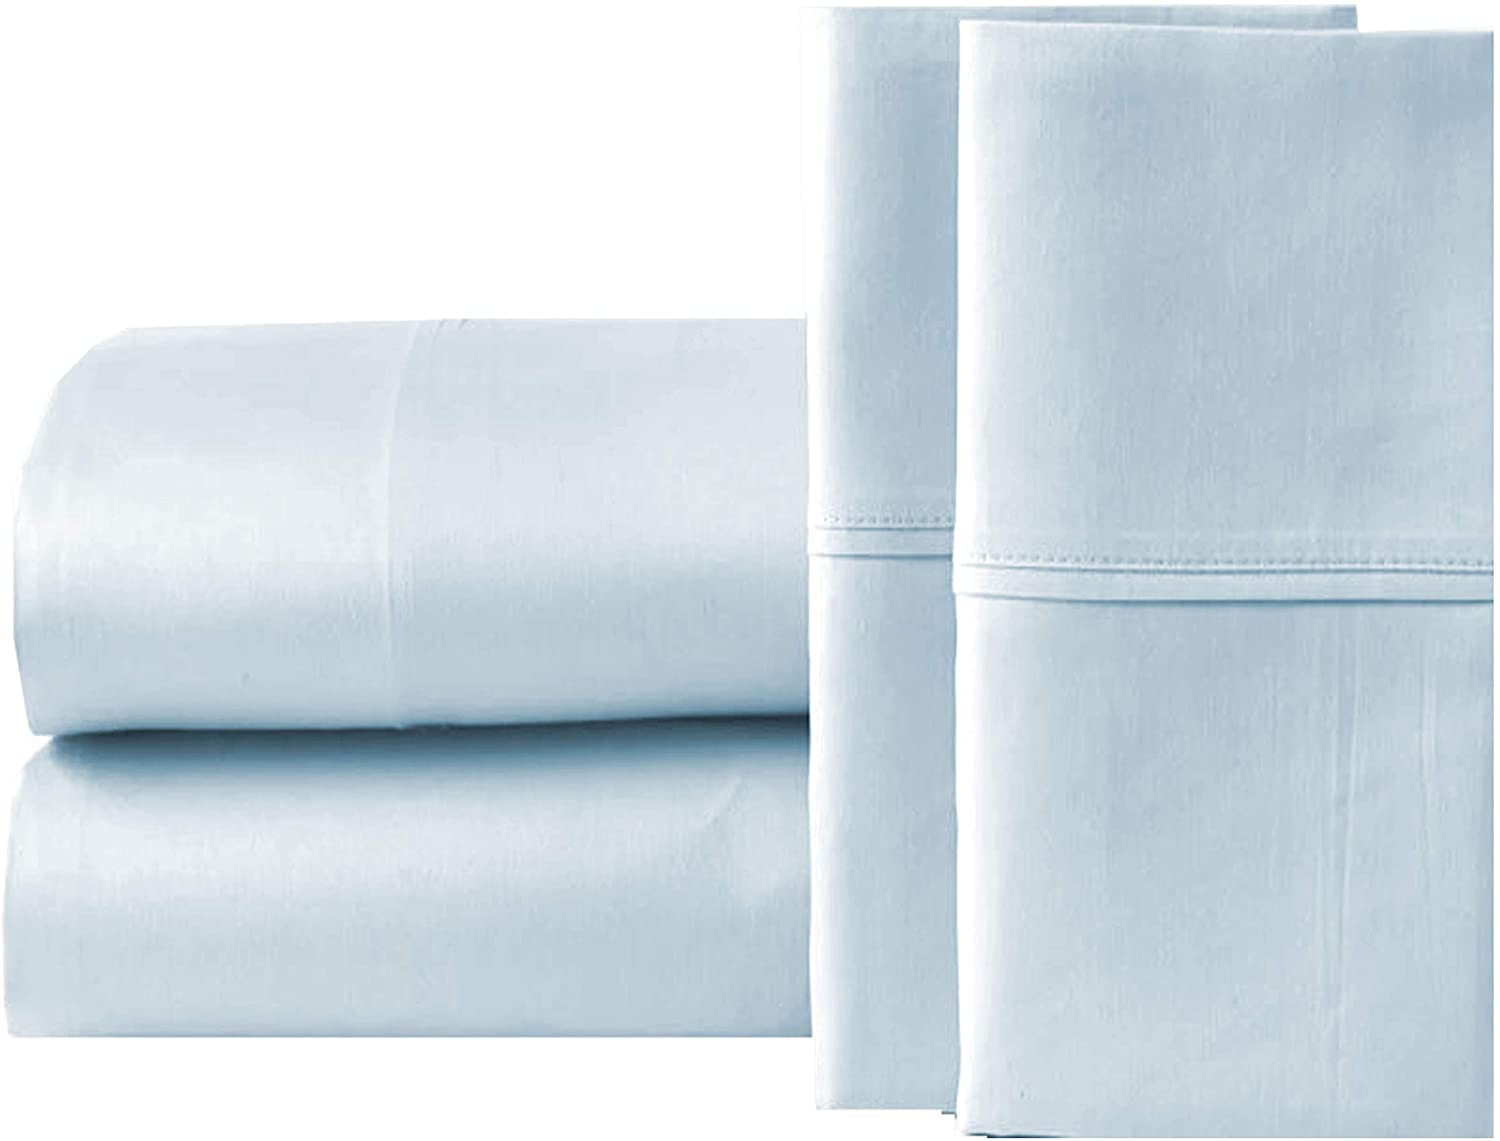 SIMPLY MONK 100% Egyptian Cotton 500 Thread Count 4PCs Sheet Set Sky Blue Solid 